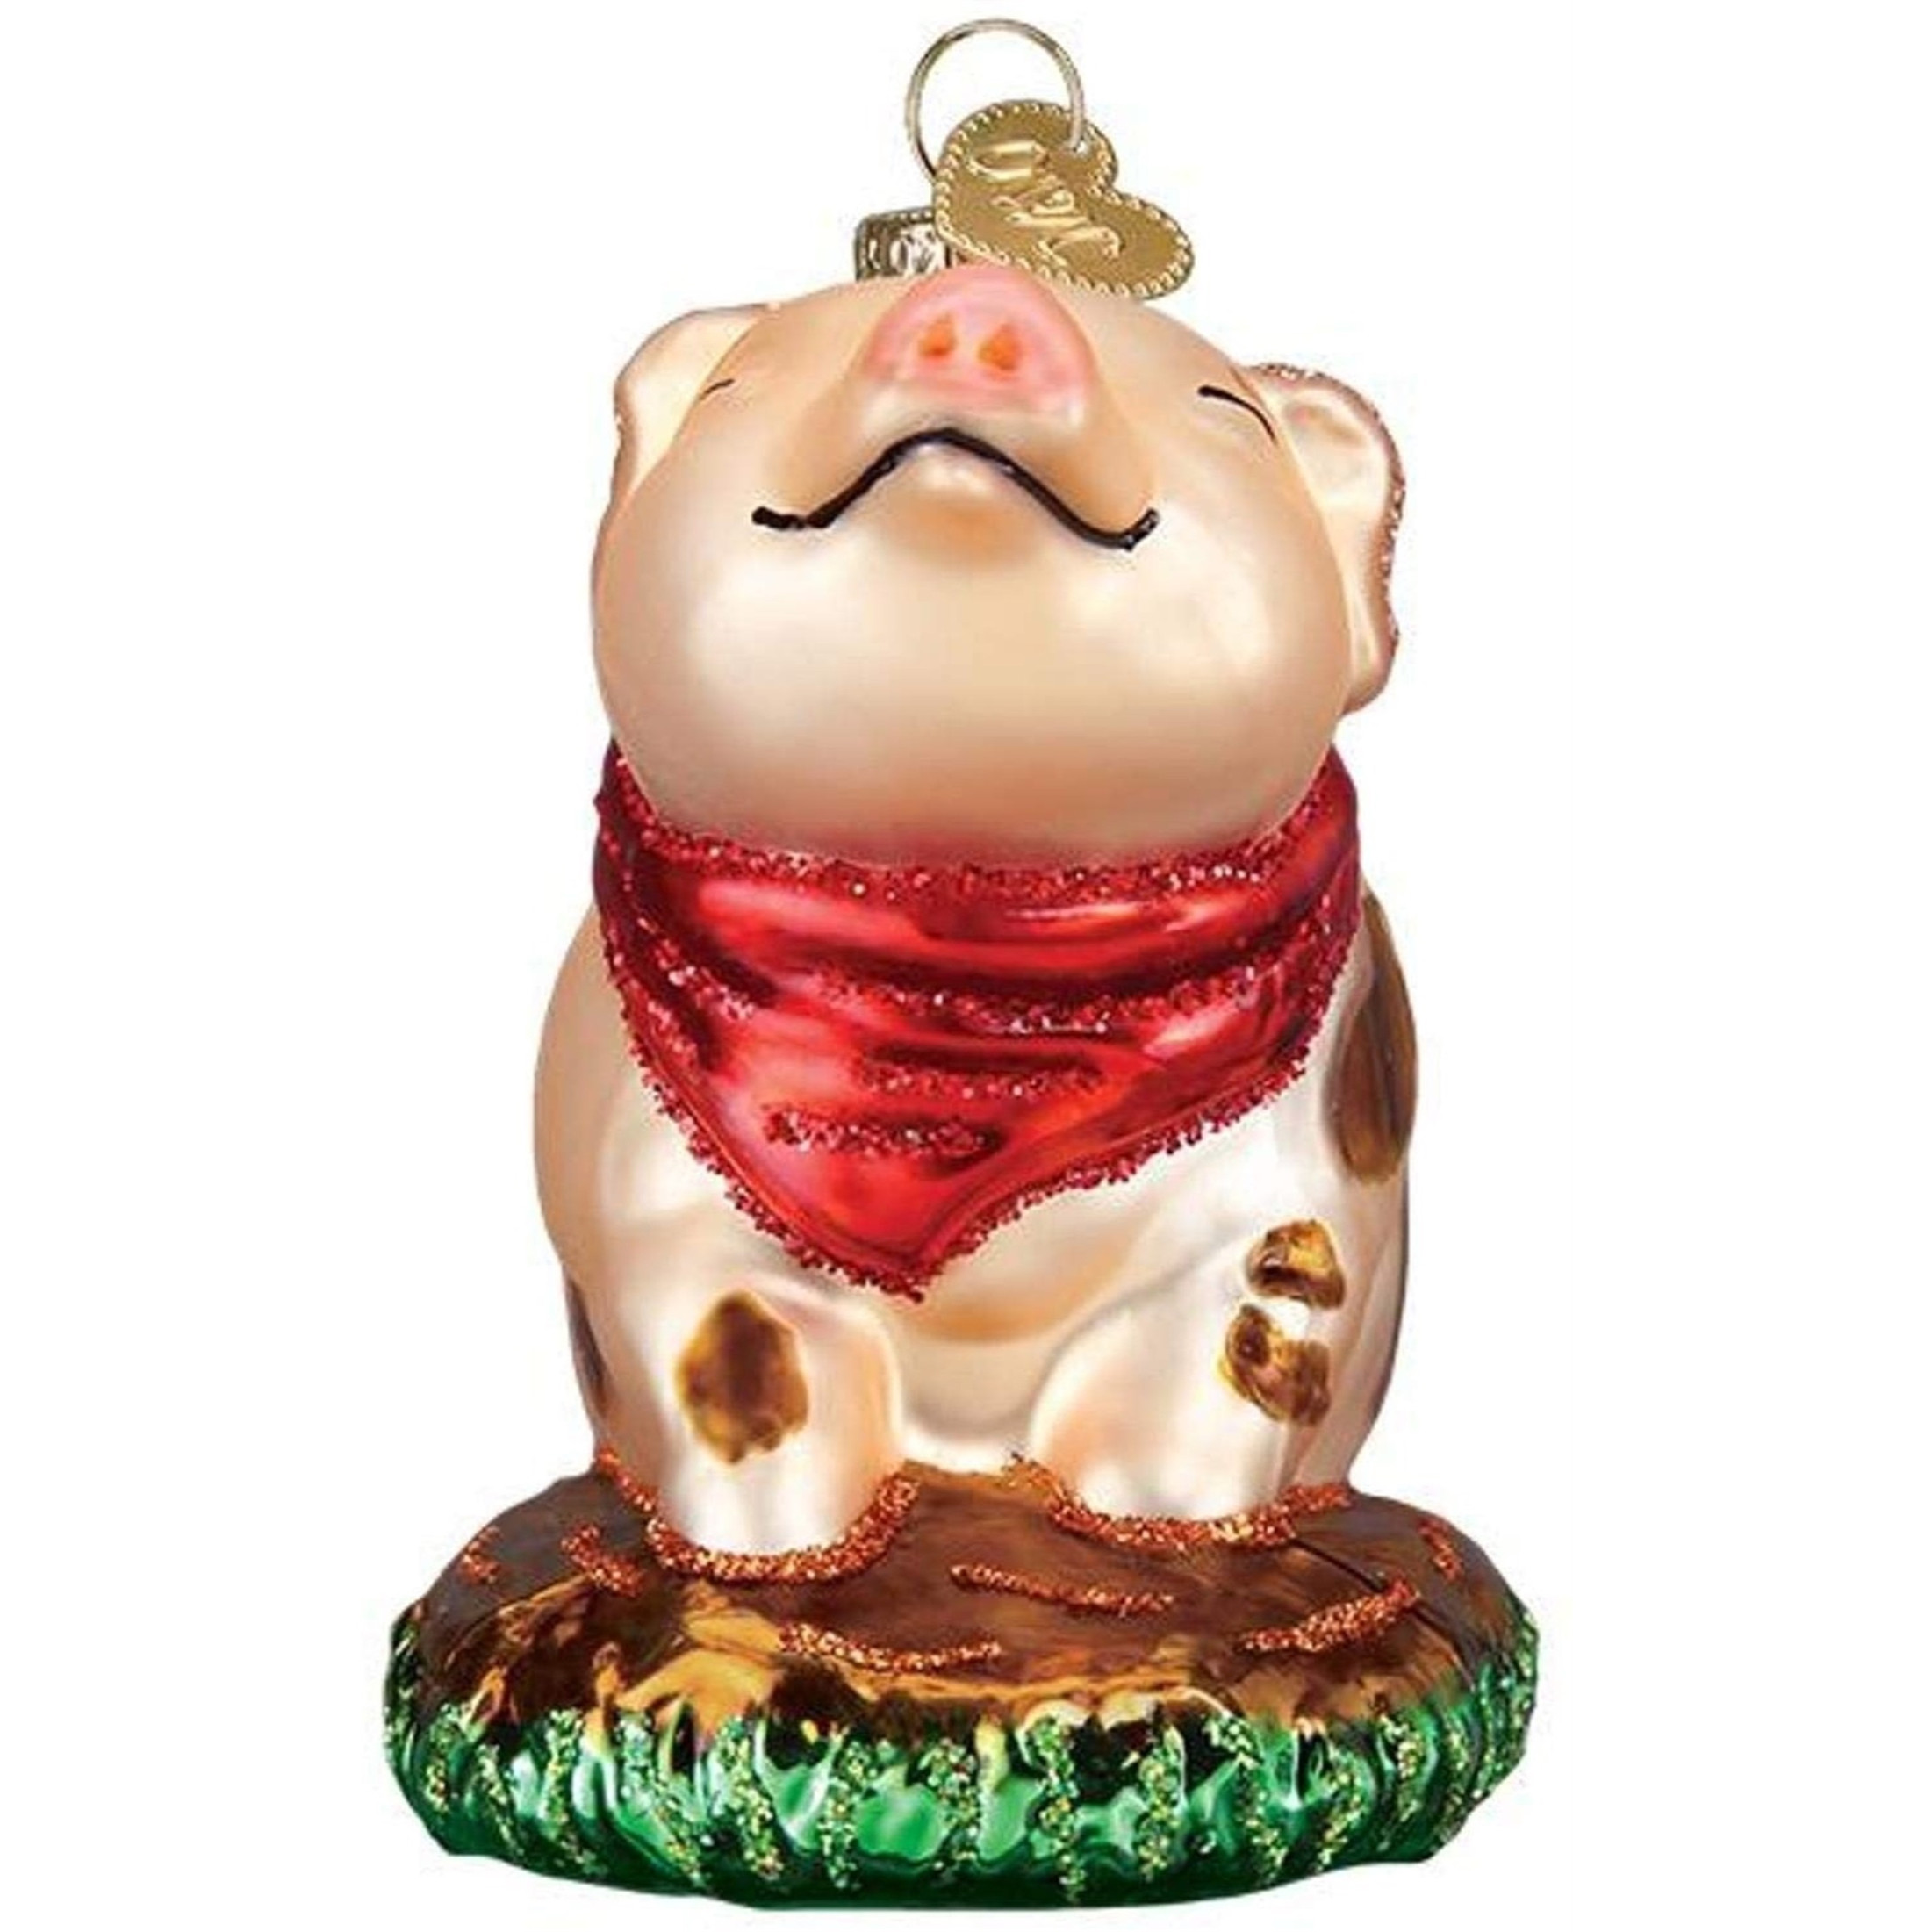 Old World Christmas Glass Blown Christmas Ornament, Piggy in The Puddle (With OWC Gift Box)